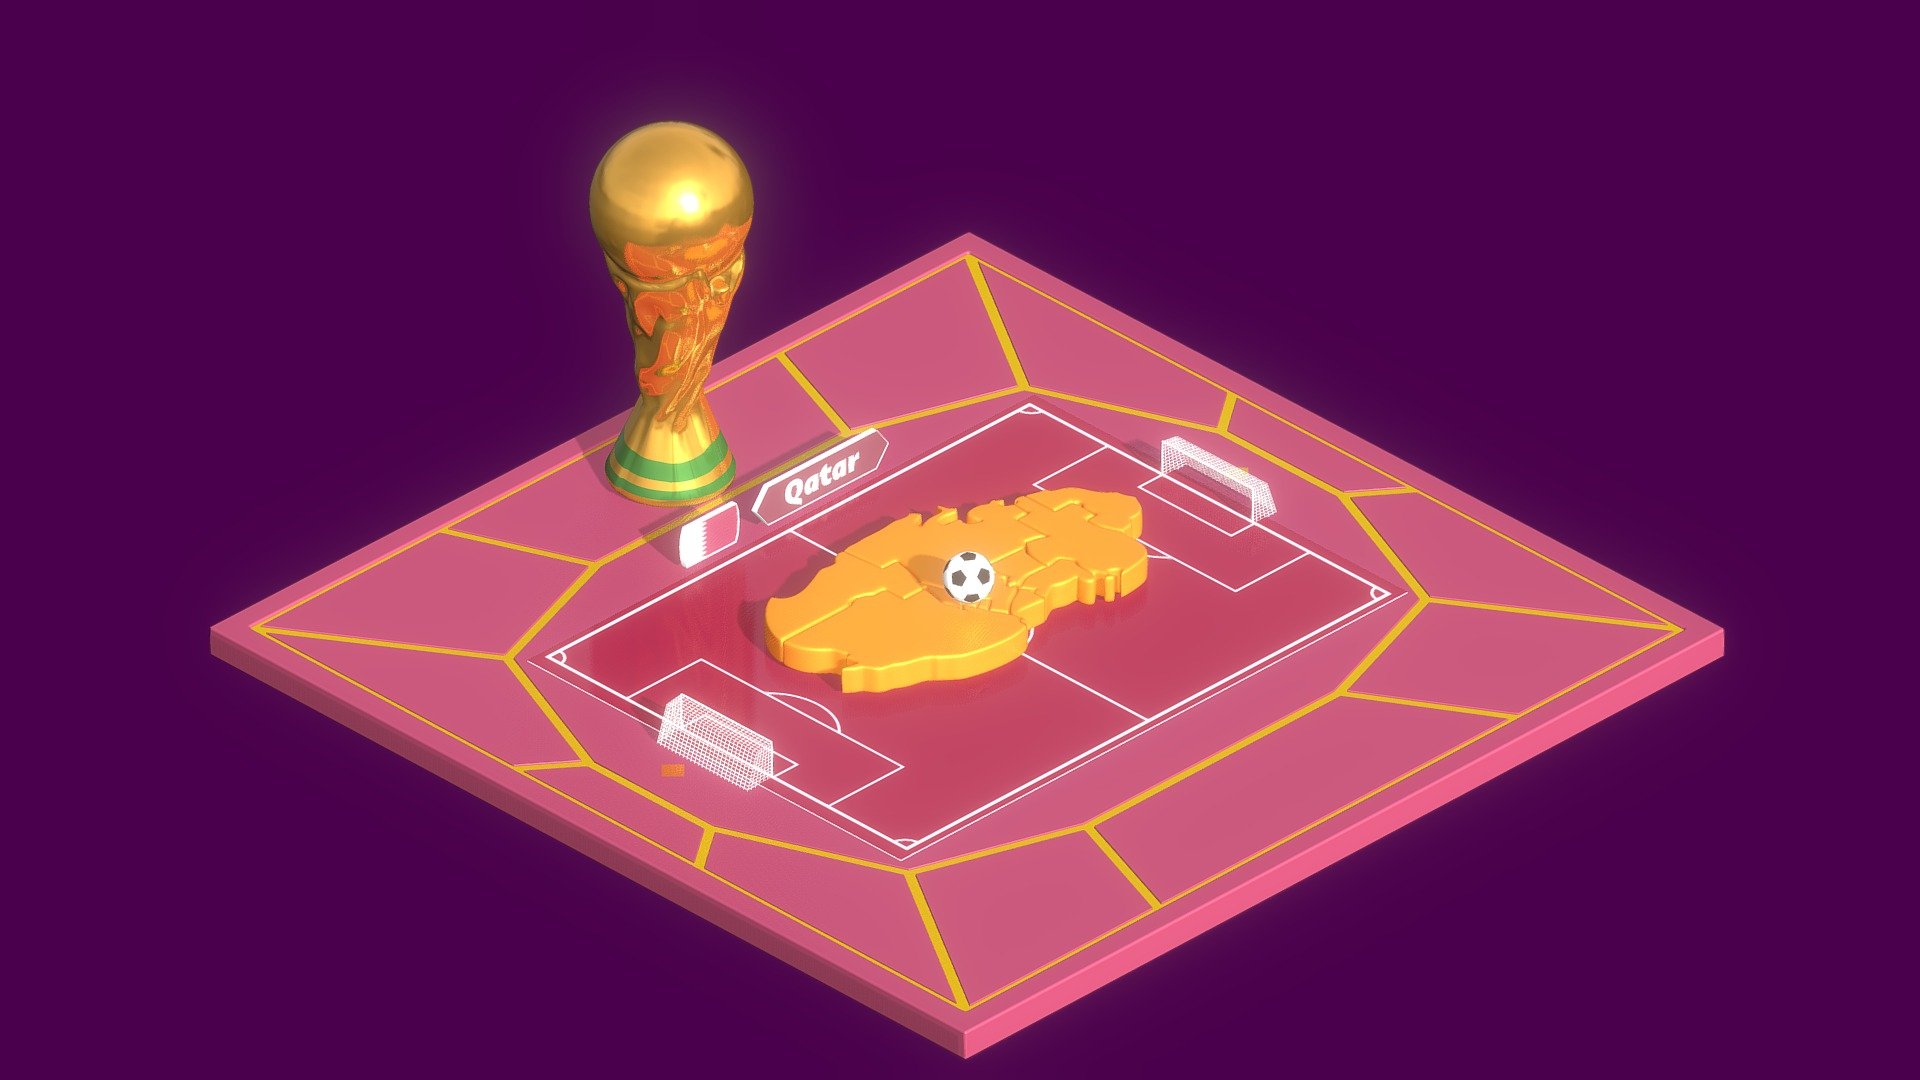 Stylized Qatar map in a World Cup small scenario with its iconic sport elements.

Made with Blender 3d model